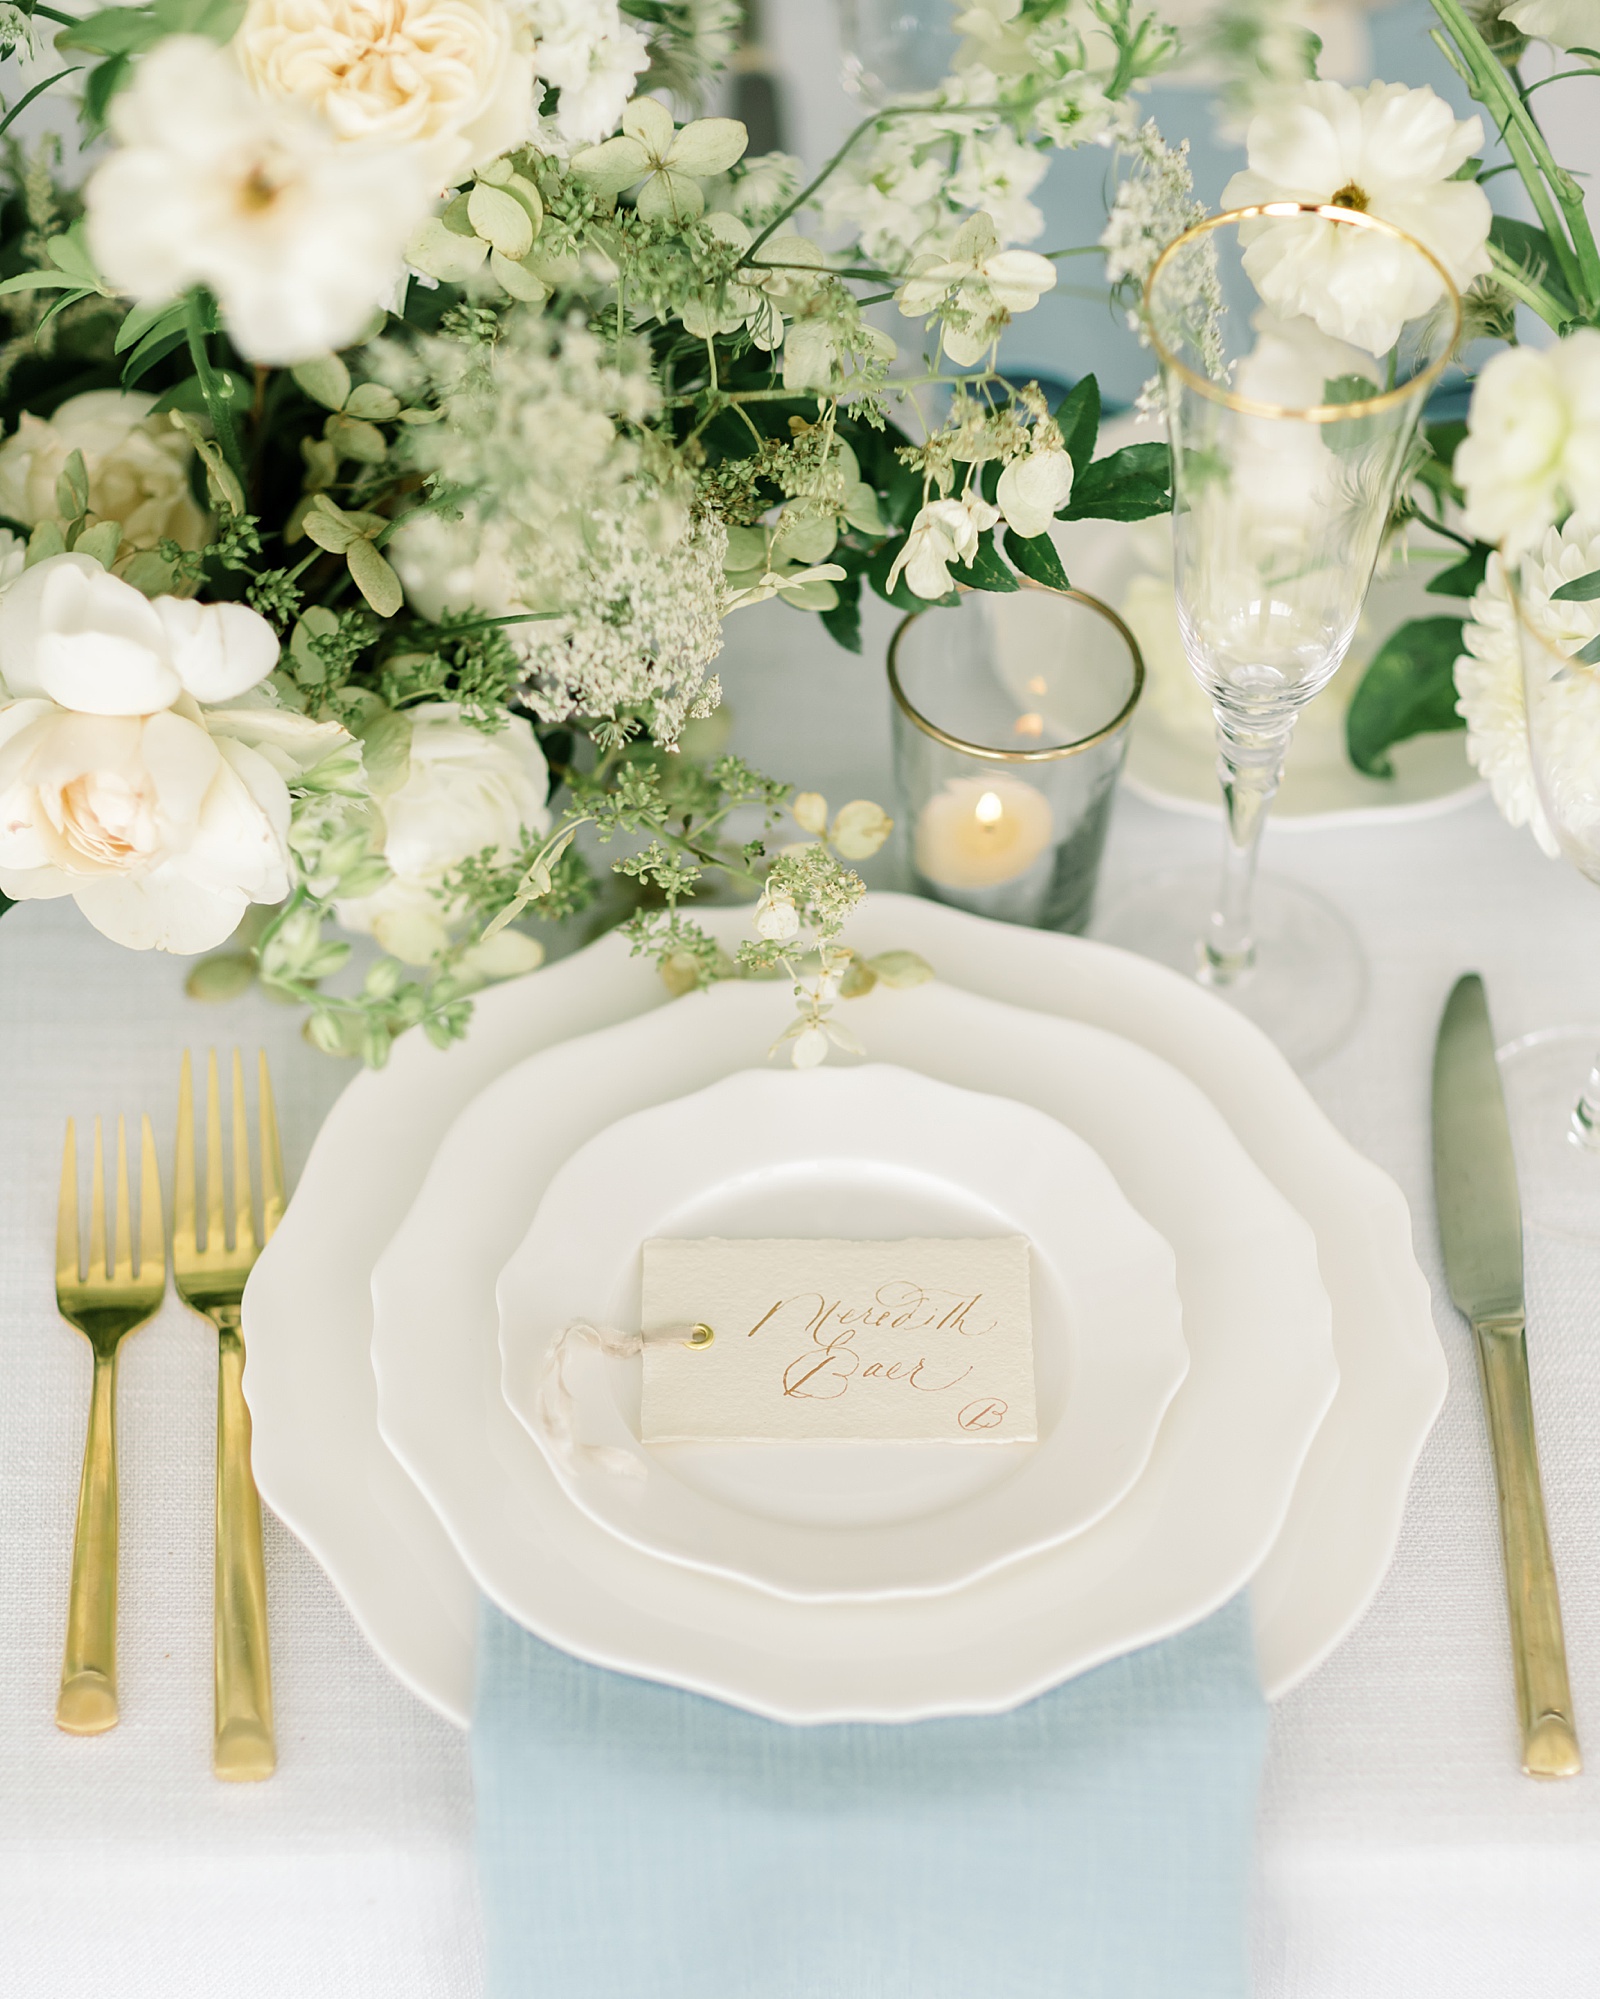 Place setting by Leda Anderson of Events held dear